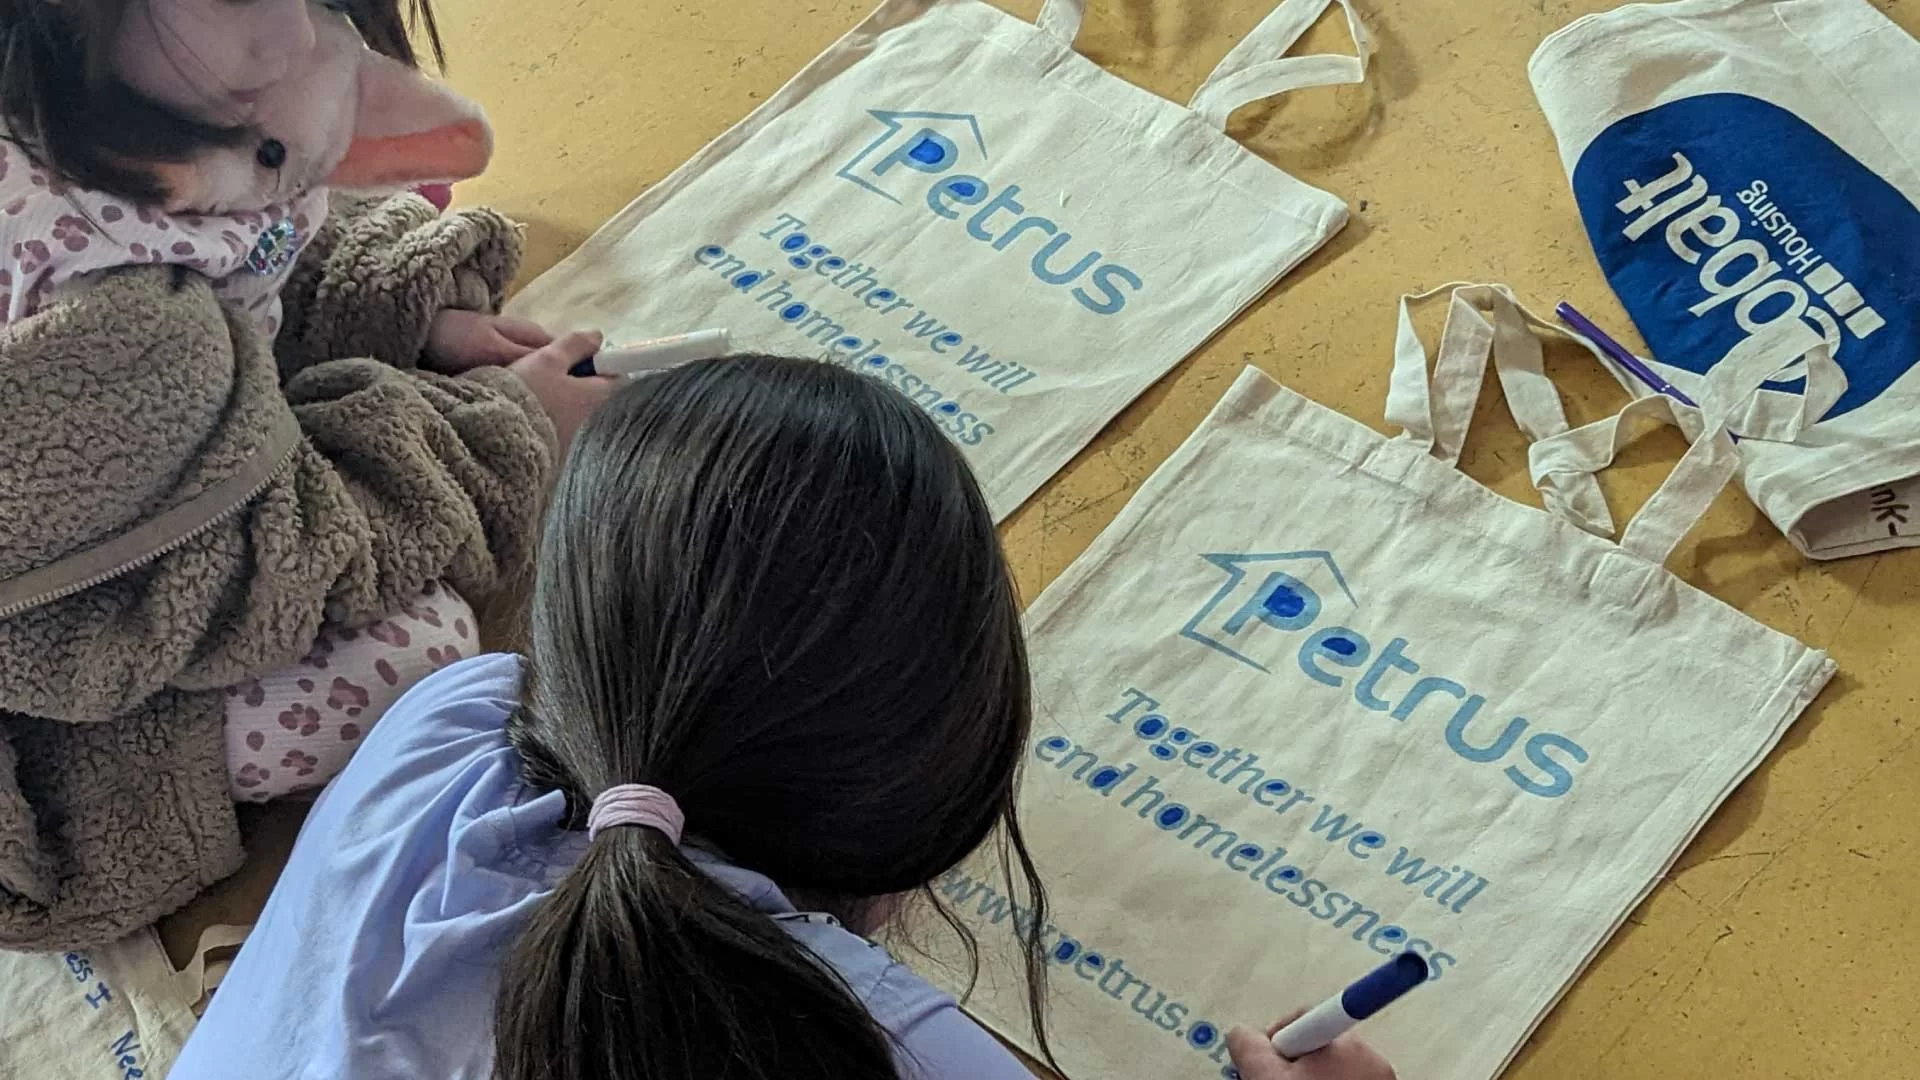 Sleep out to help out event, image of two young pupils drawing on a Petrus canvas bag to make it look prettier